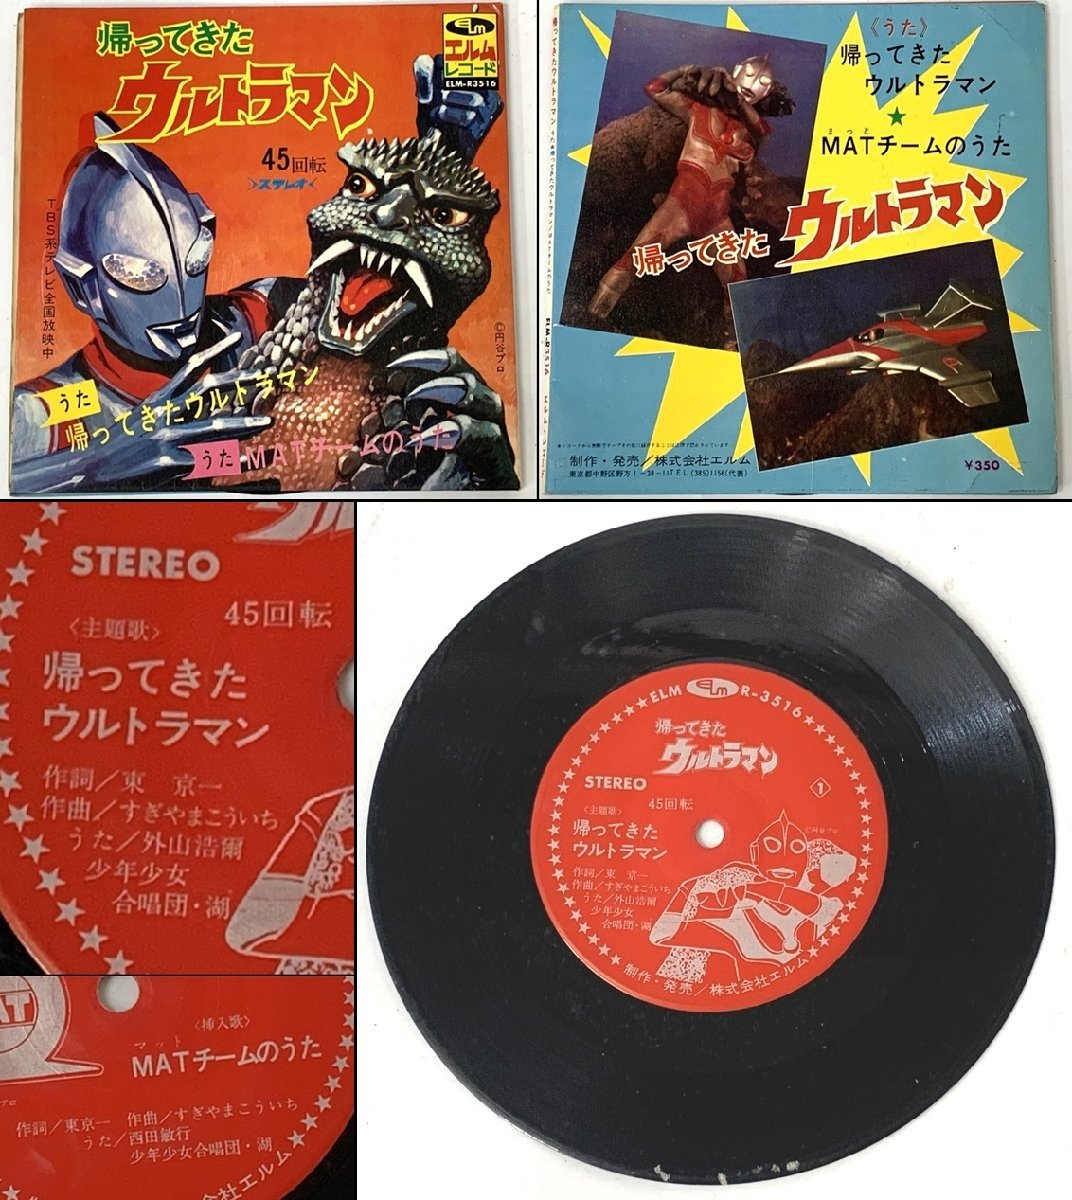 * (3) monster .. Return of Ultraman suspension ke. thing kun Star of the Giants other LP EP record doughnuts record together set that time thing manga theme music etc. 